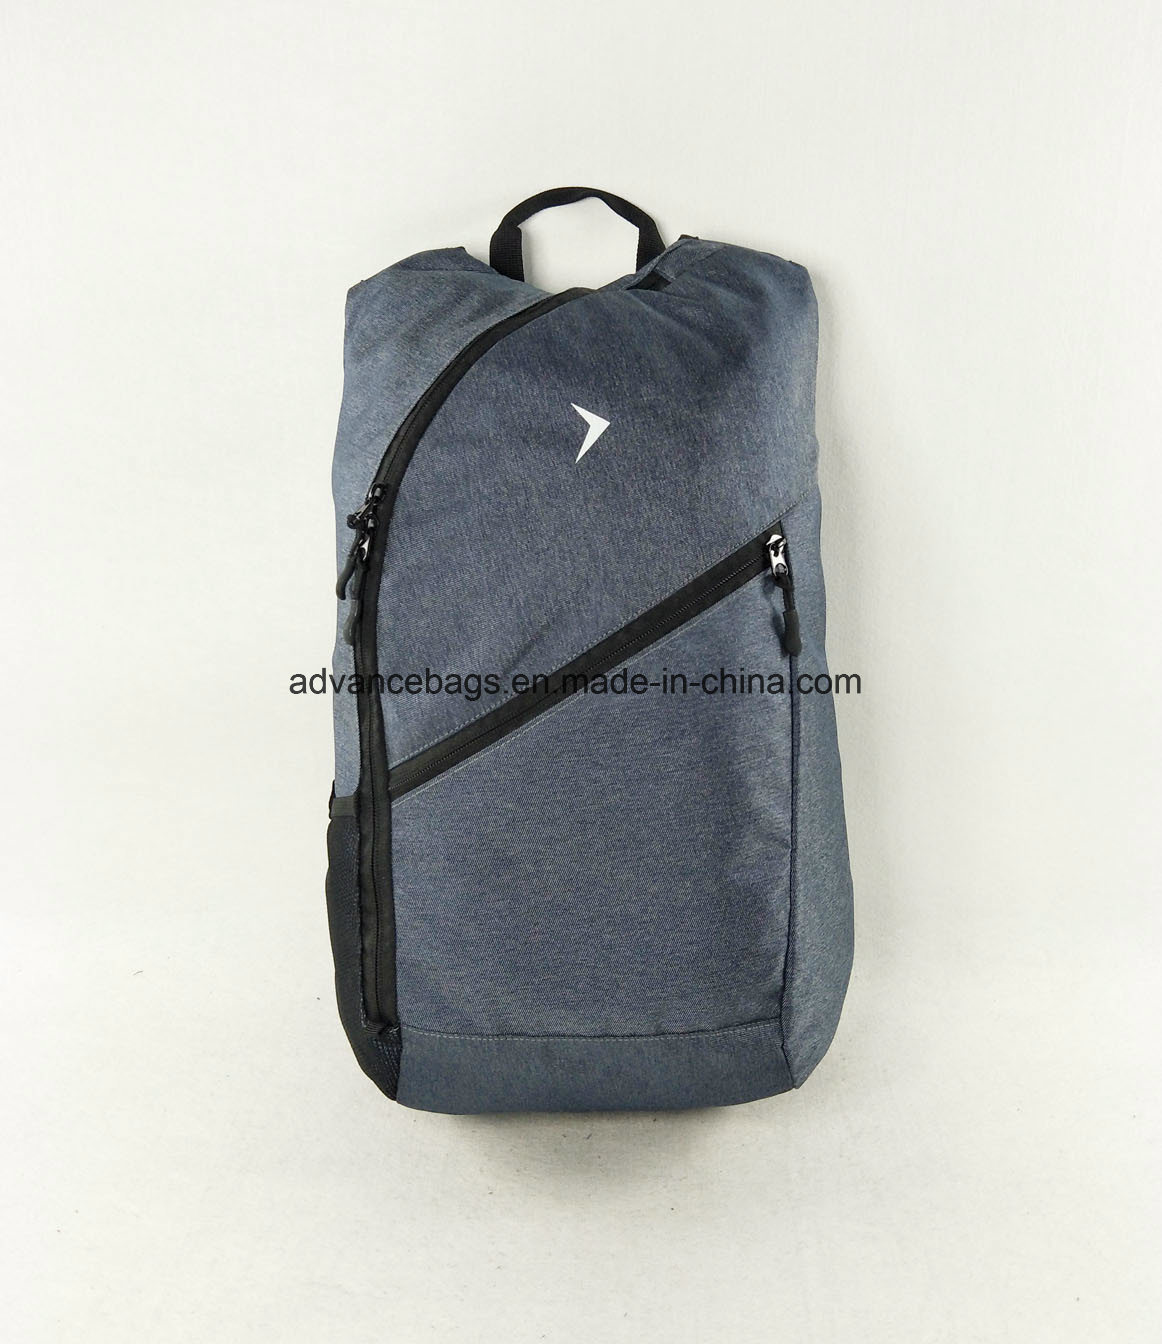 Professional Light Fabric Laptop Travel Sports Backpack